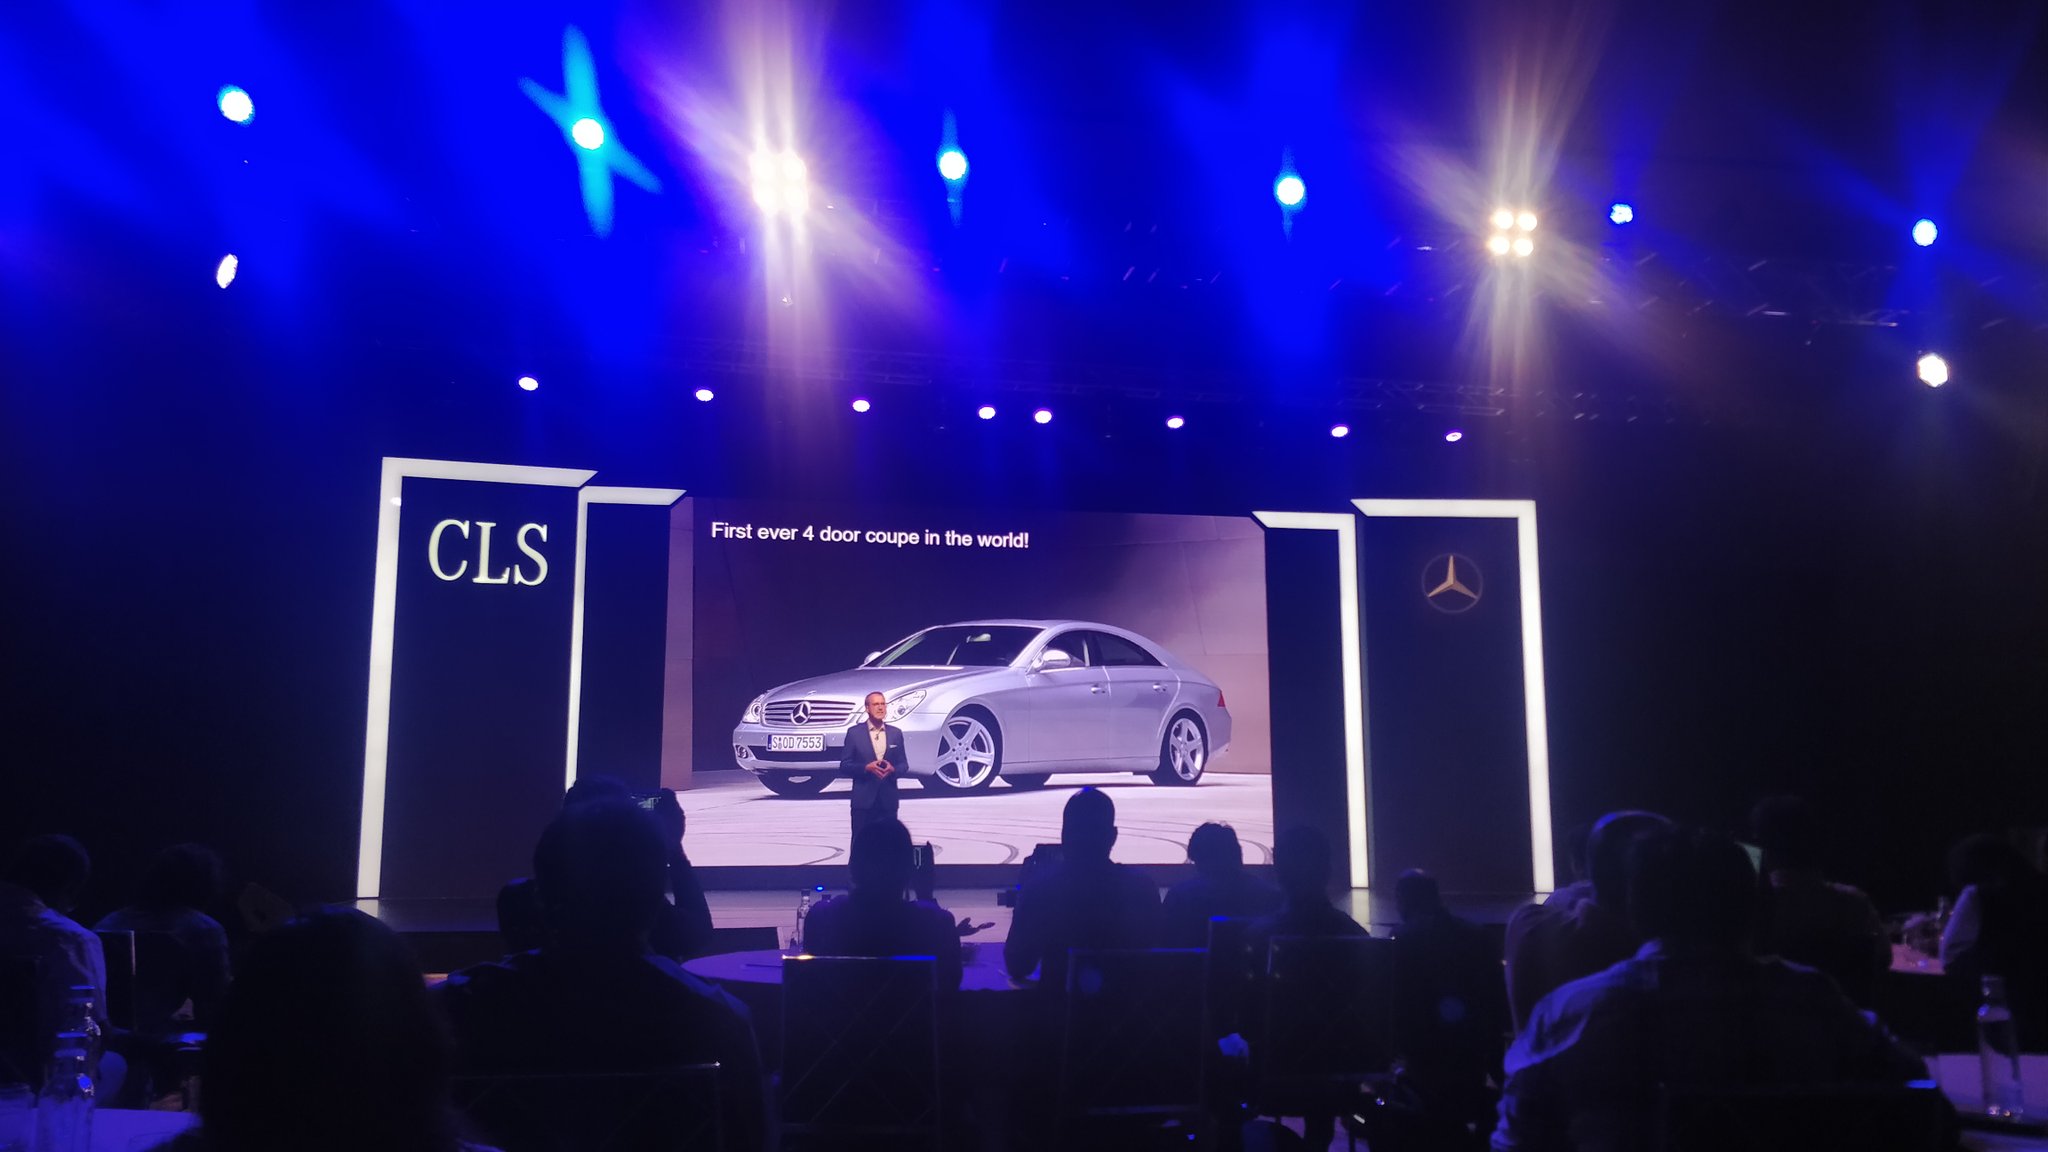 <p>The New CLS pioneered this trend of sporty coupe-styled sedans when it first launched in 2004. The 3rd gen car gets launched today.</p>